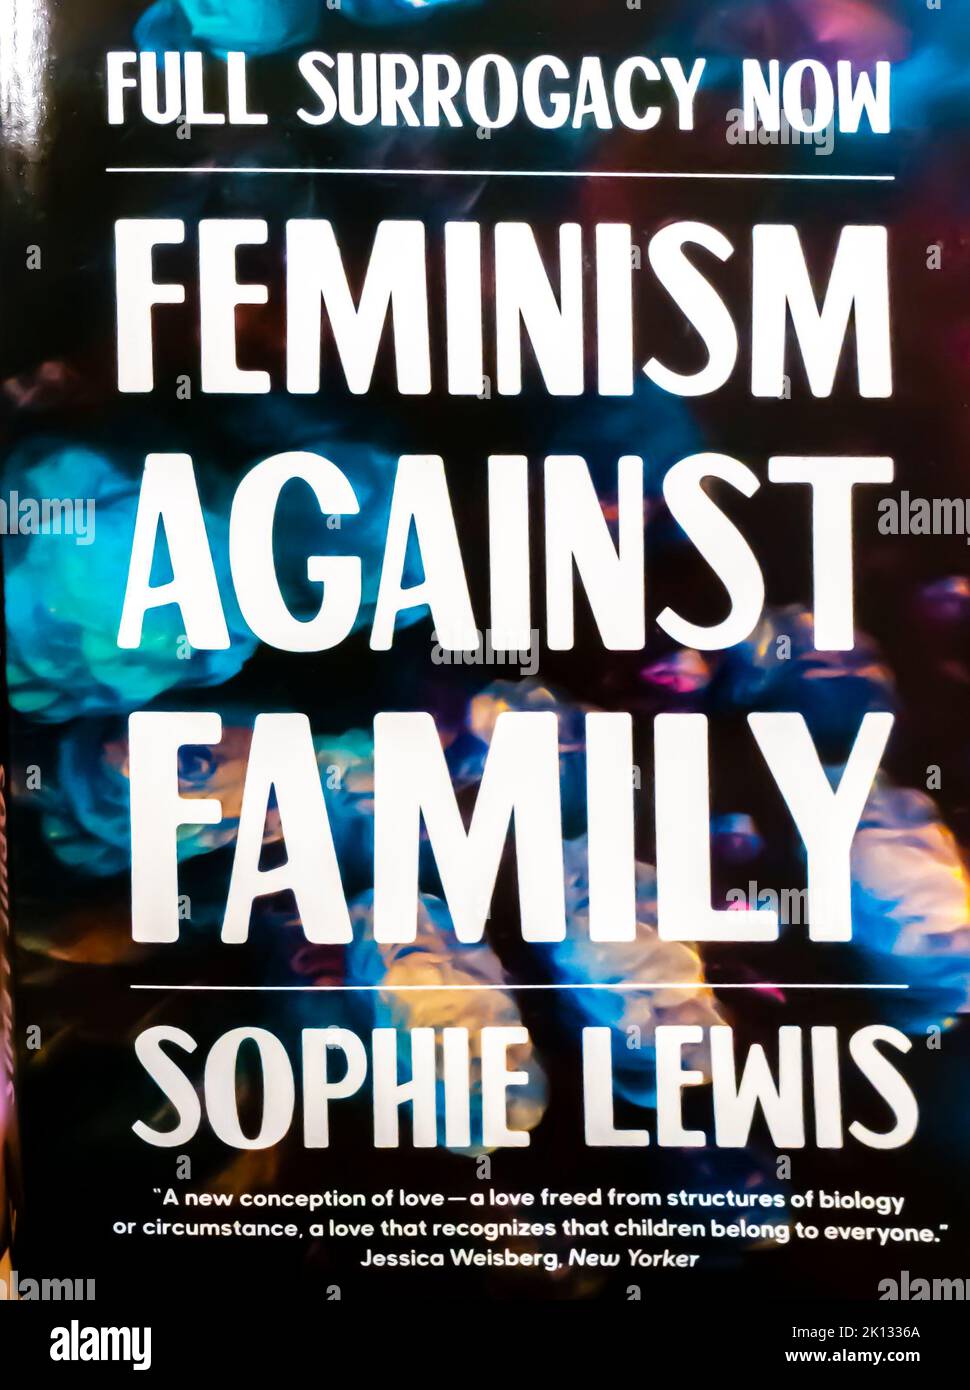 Full Surrogacy Now: Feminism Against Family Book by Sophie Lewis. 2019 Stock Photo